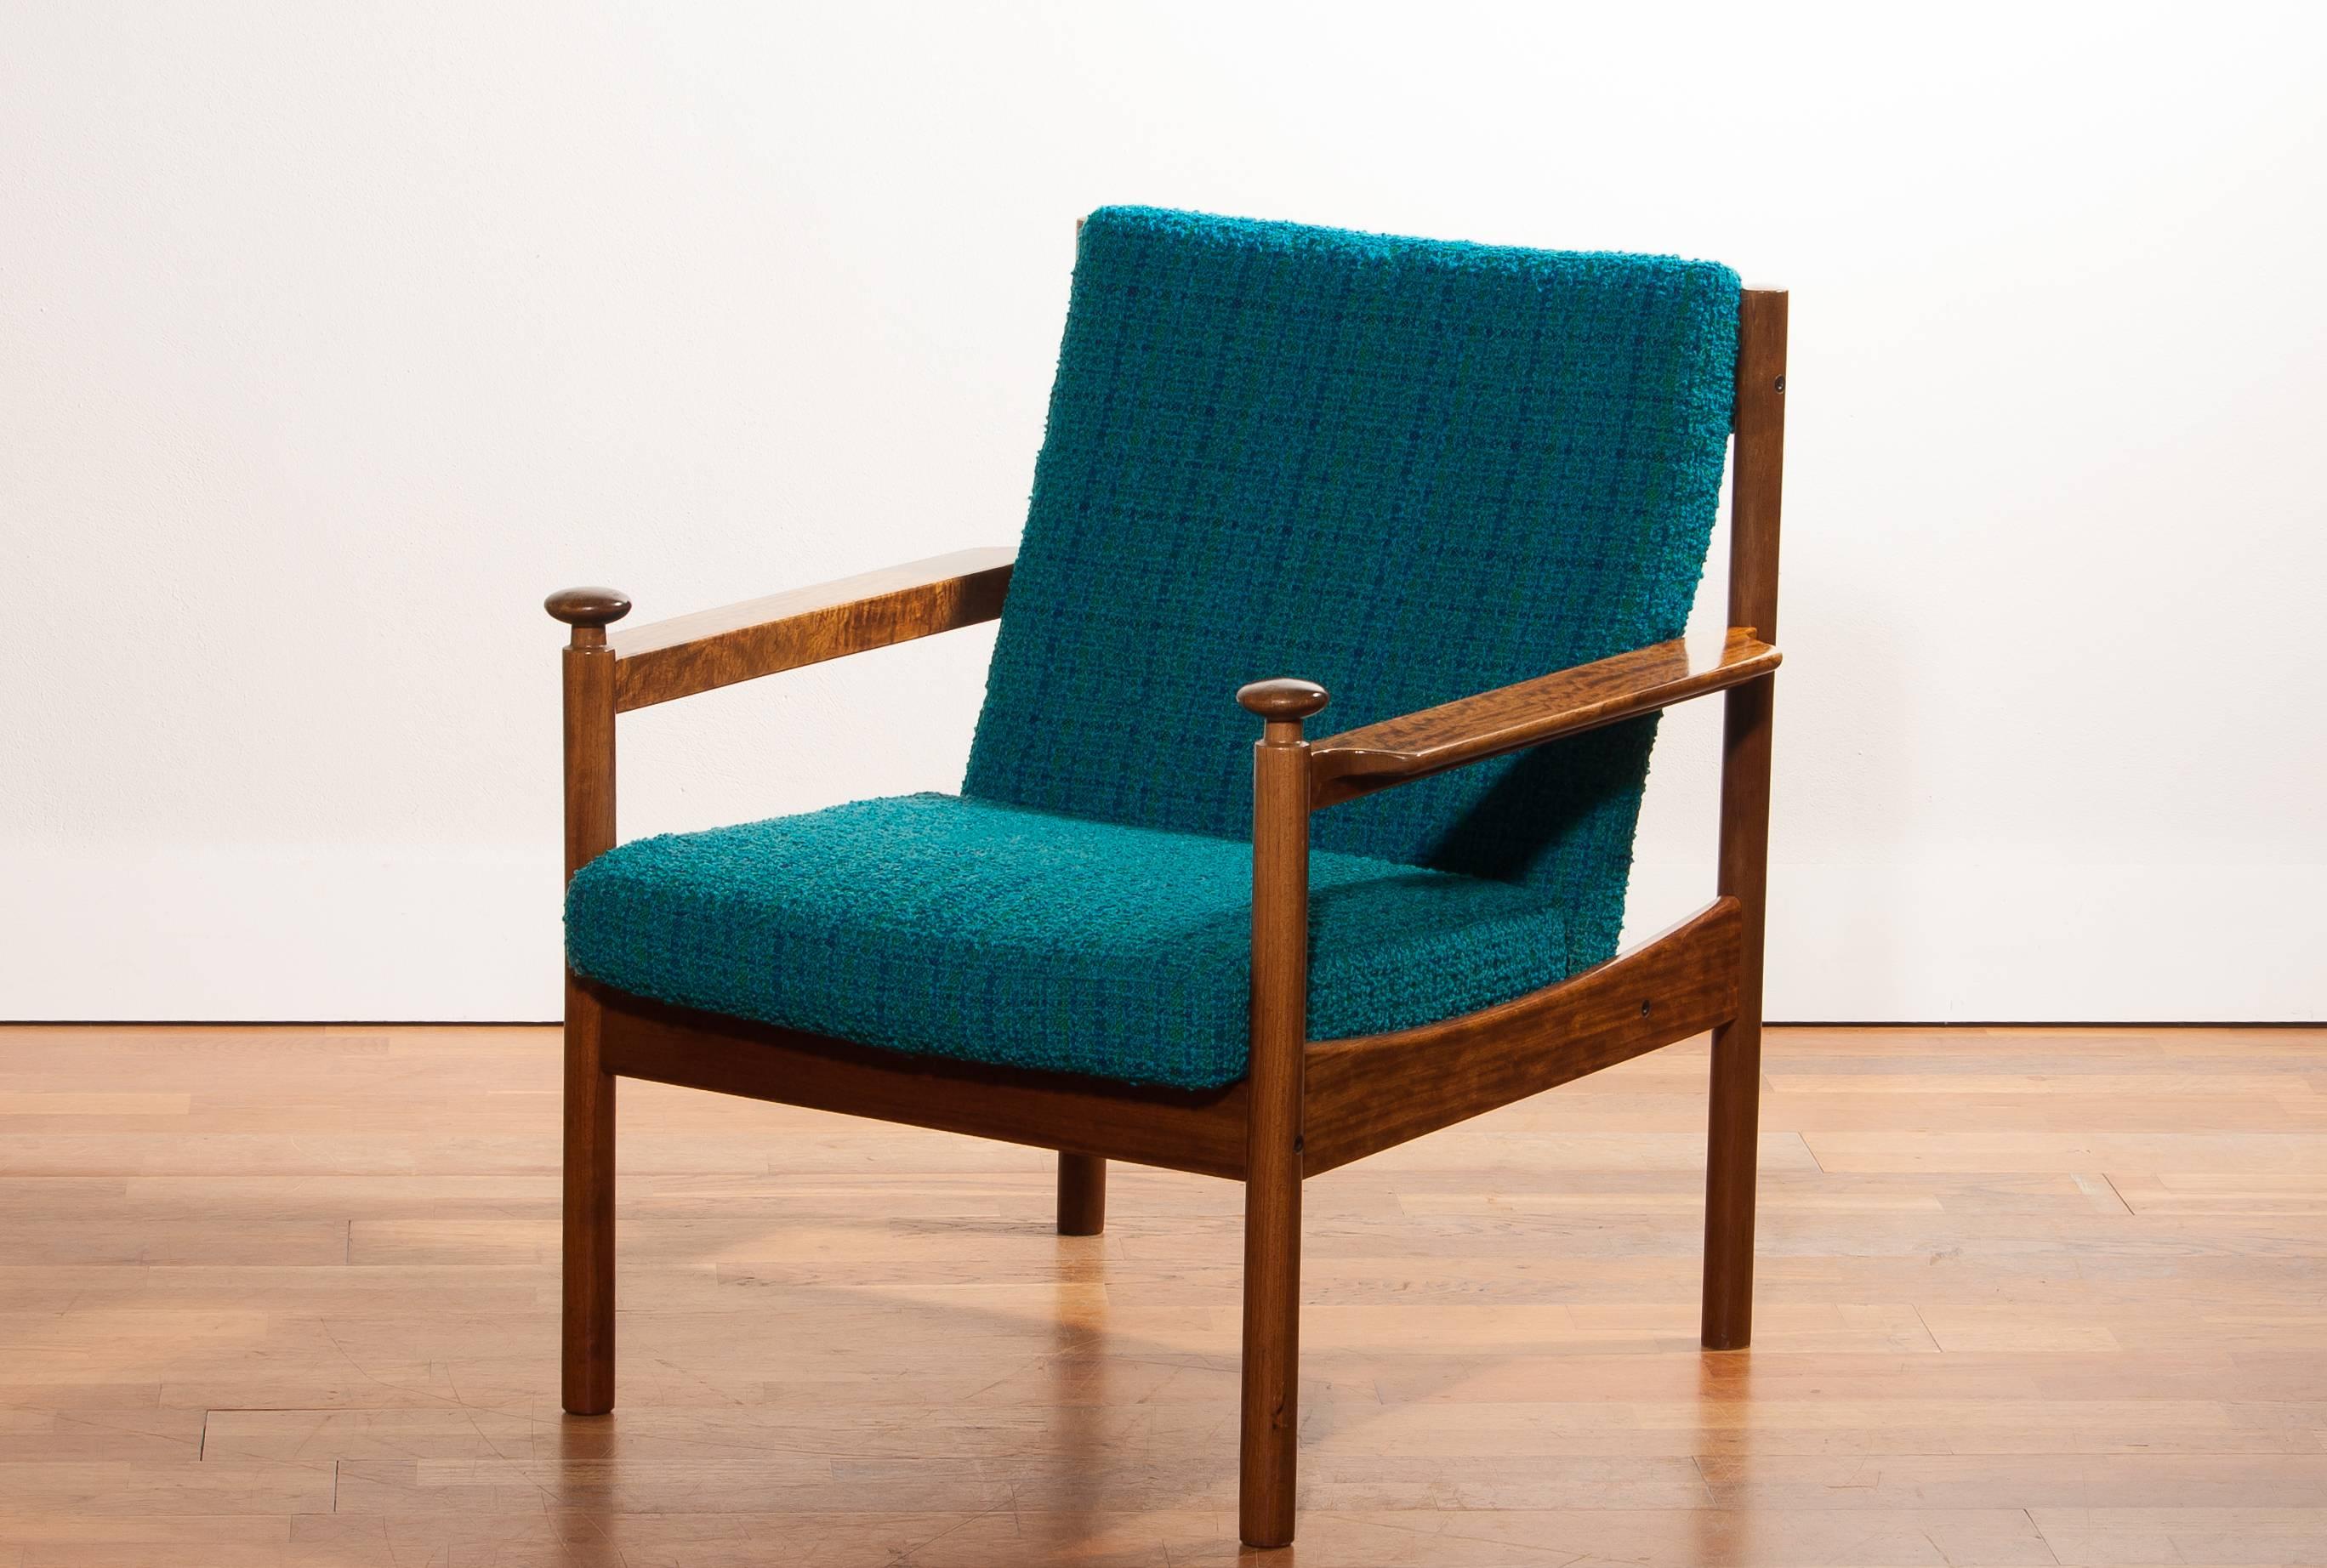 Beautiful chair designed by Torbjørn Afdal for Sandvik & Co Mobler, Norway.
The wooden frame with the blue fabric cushions makes it a very nice combination.
Period 1950s
Dimensions: H. 83 cm x W. 70 cm x D. 71 cm x SH. 40 cm.